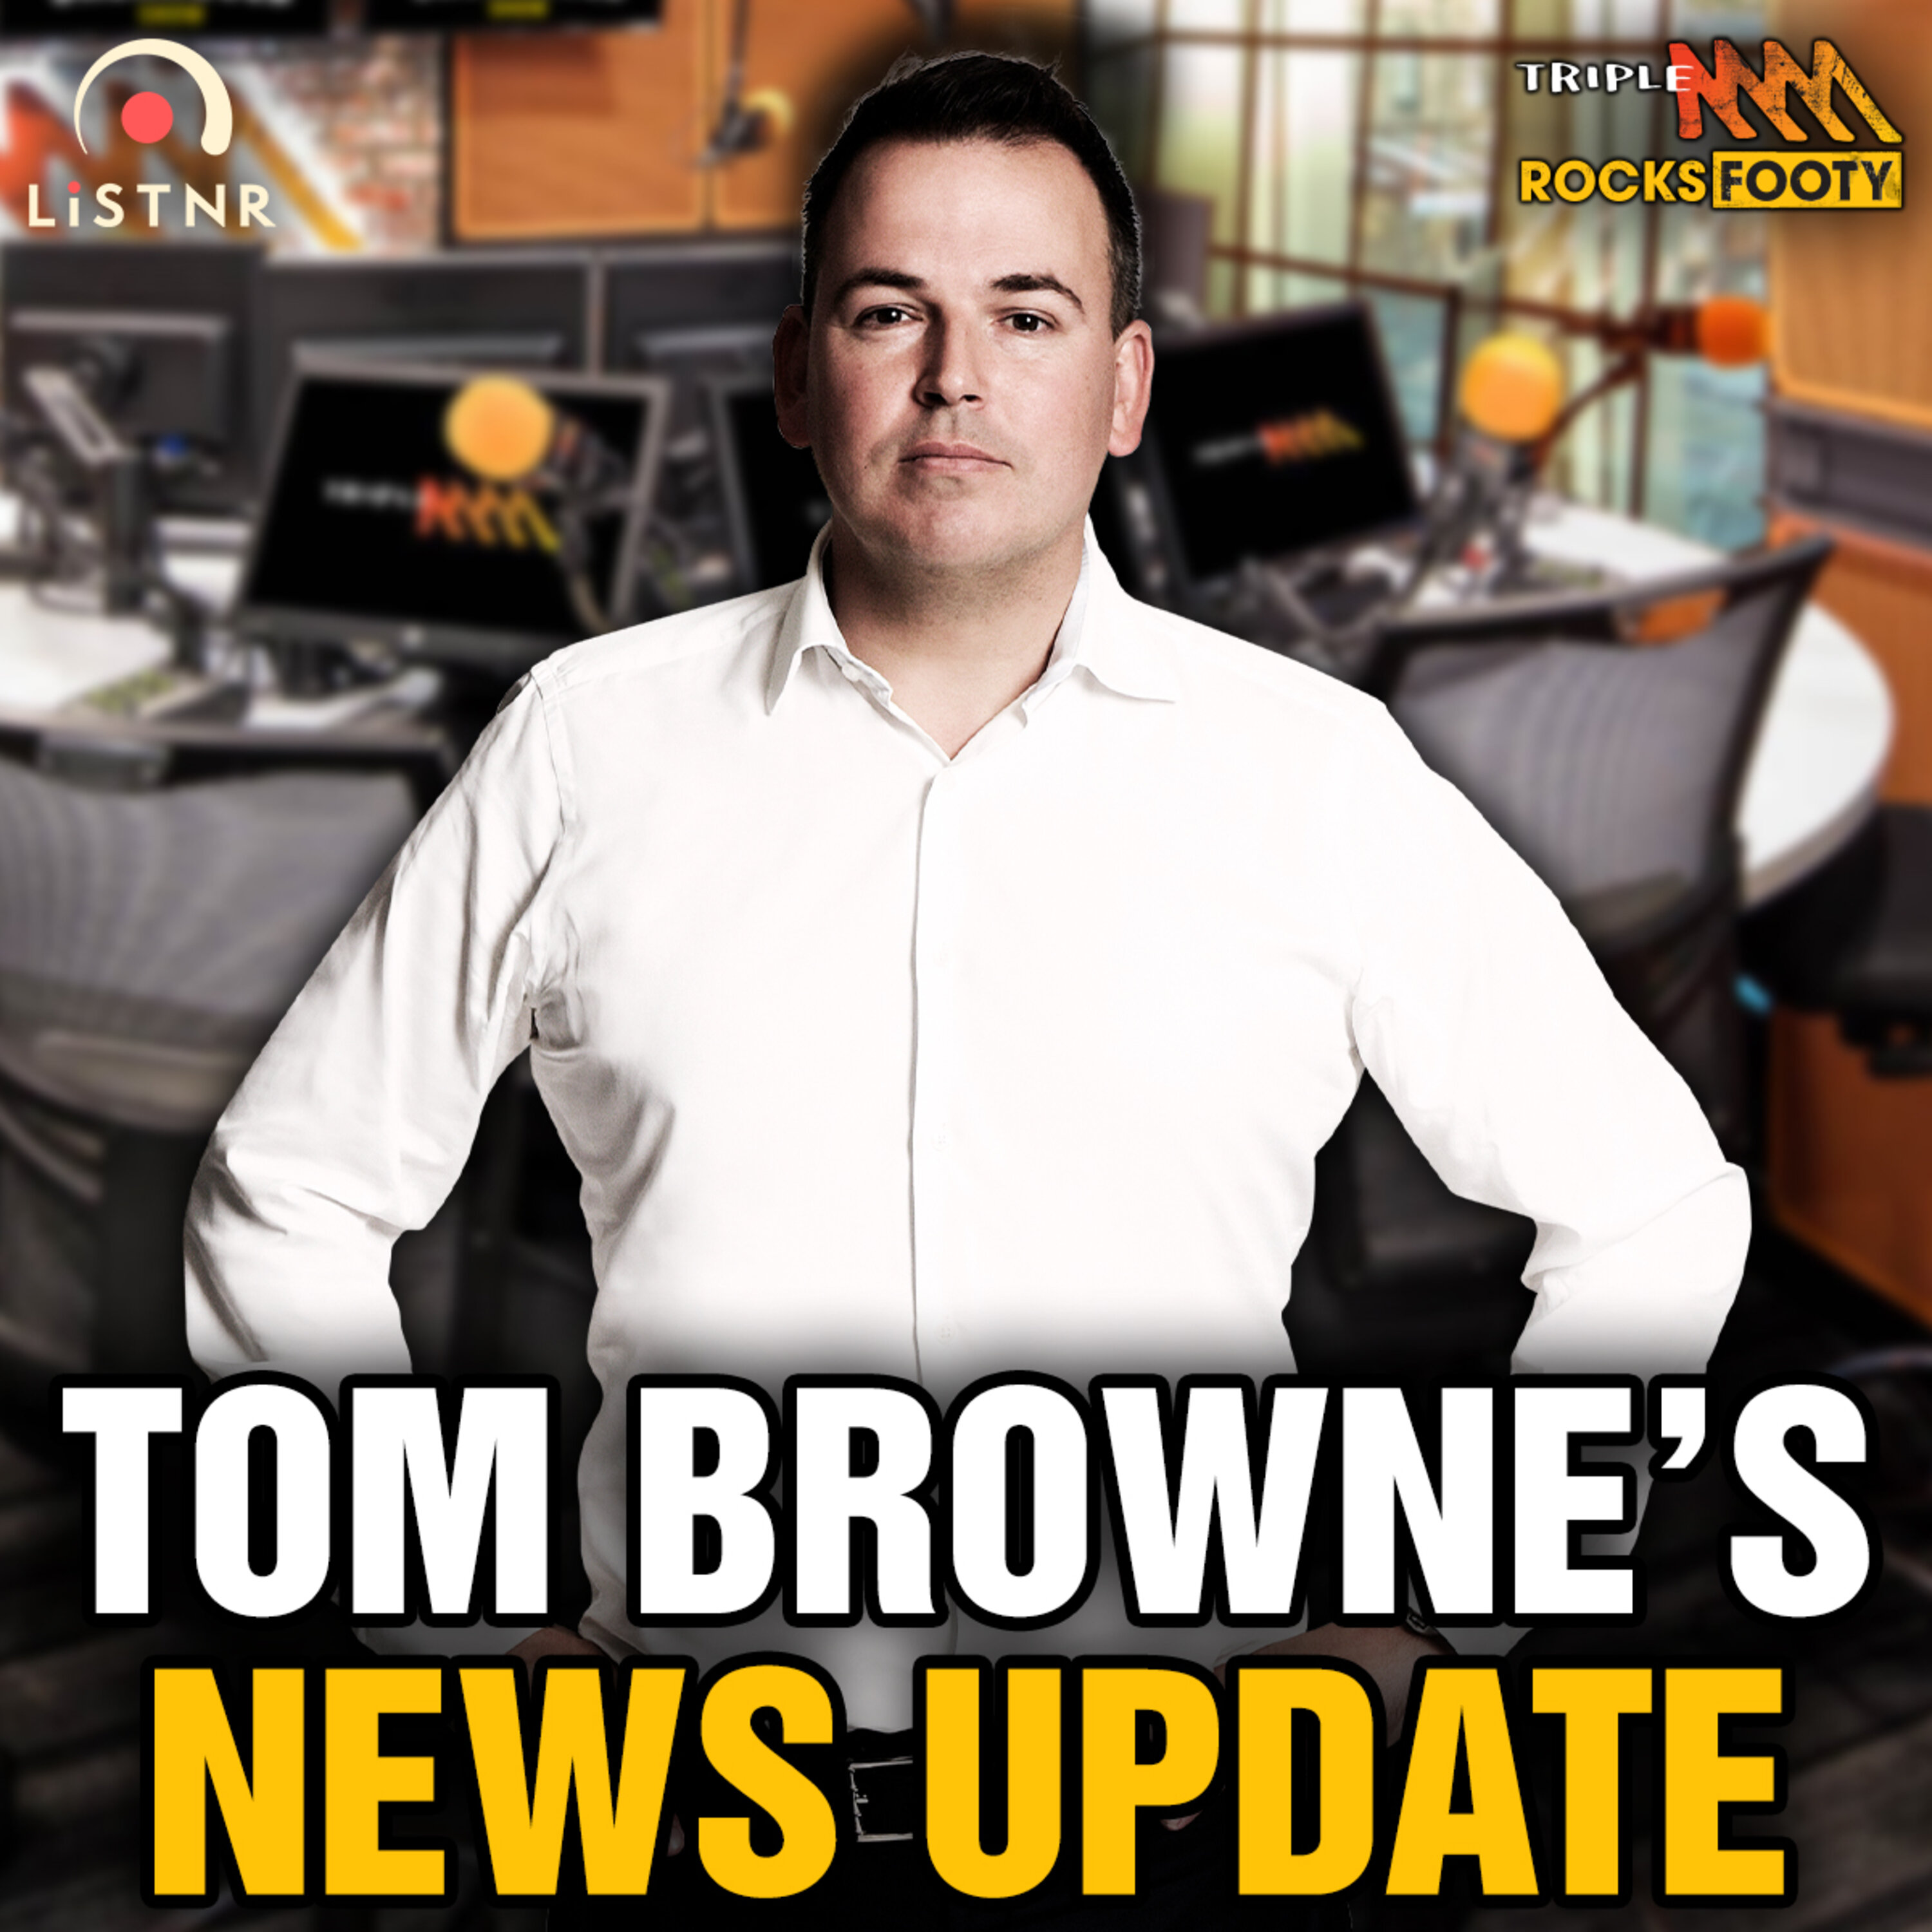 Tom Browne's News | The two clubs "heavily interested" in Tom de Koning, update on Essendon's footy department changes, Carlton and Richmond kick off the season tonight